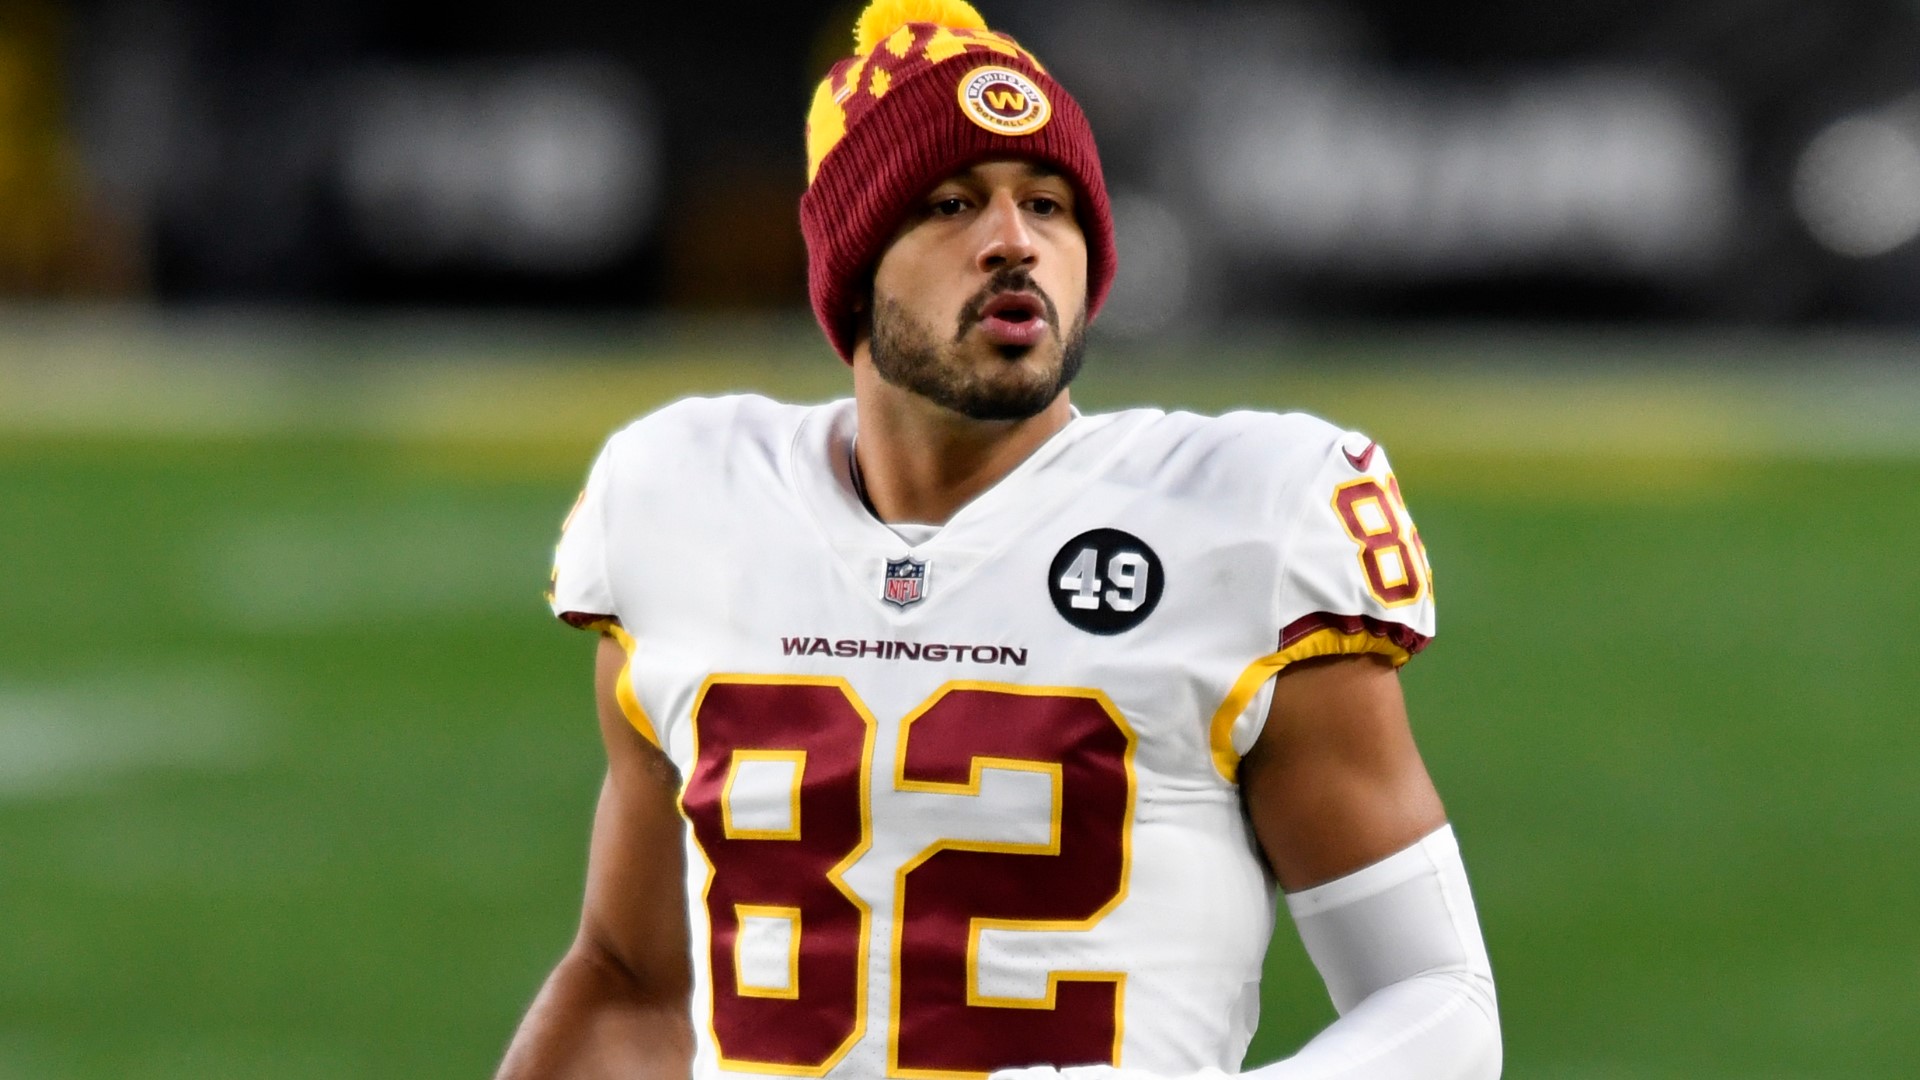 Chris Russell of the Locked On WFT Podcast reacts to Washington tight end Logan Thomas signing an extension with the team this week ahead of training camp.